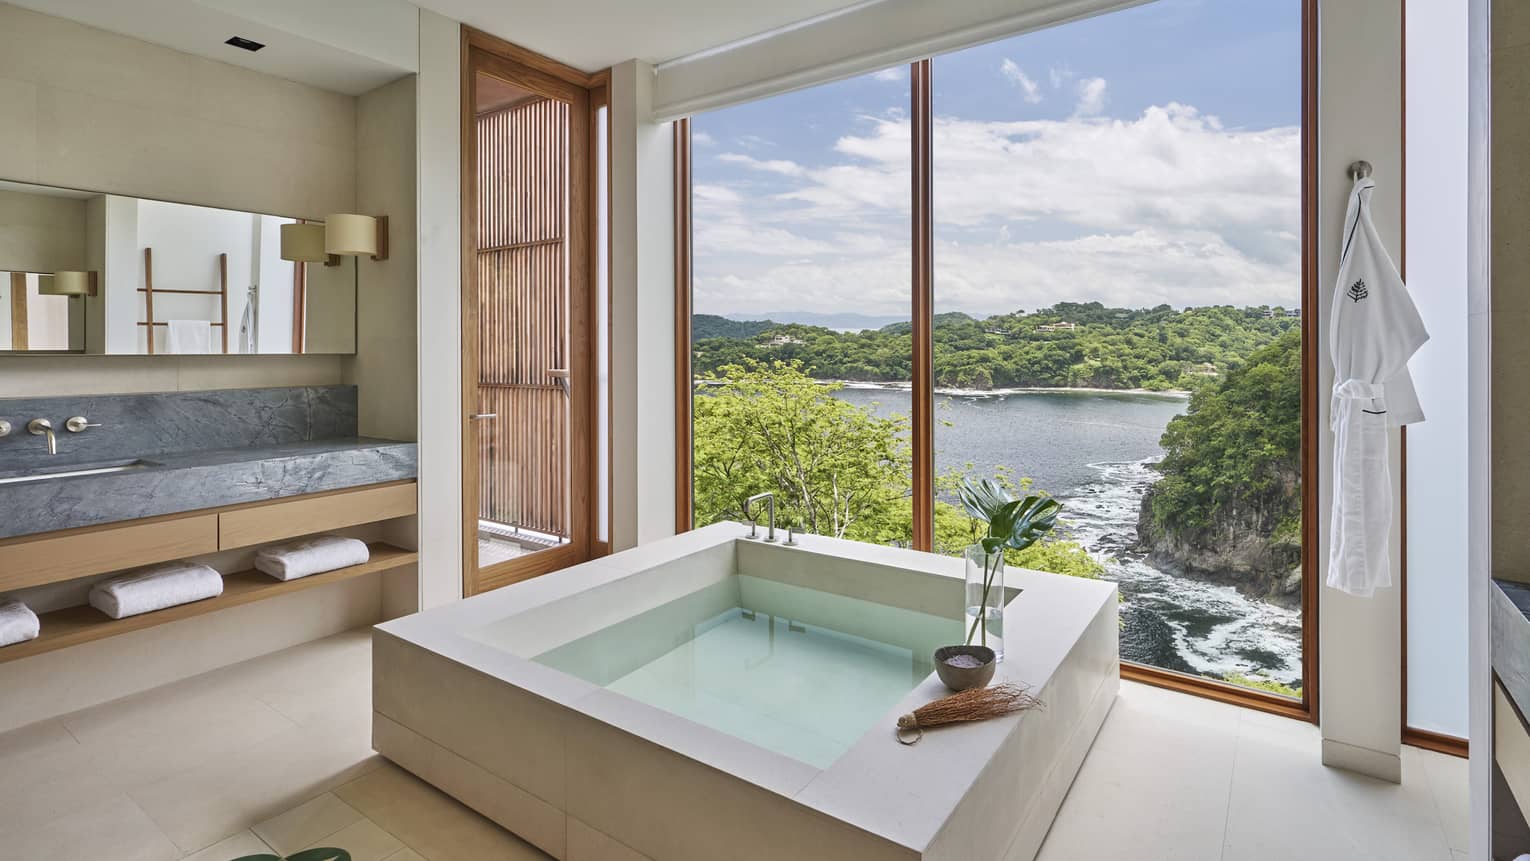 Bathroom with square stone tub; a wall of windows look out to the sea and trees